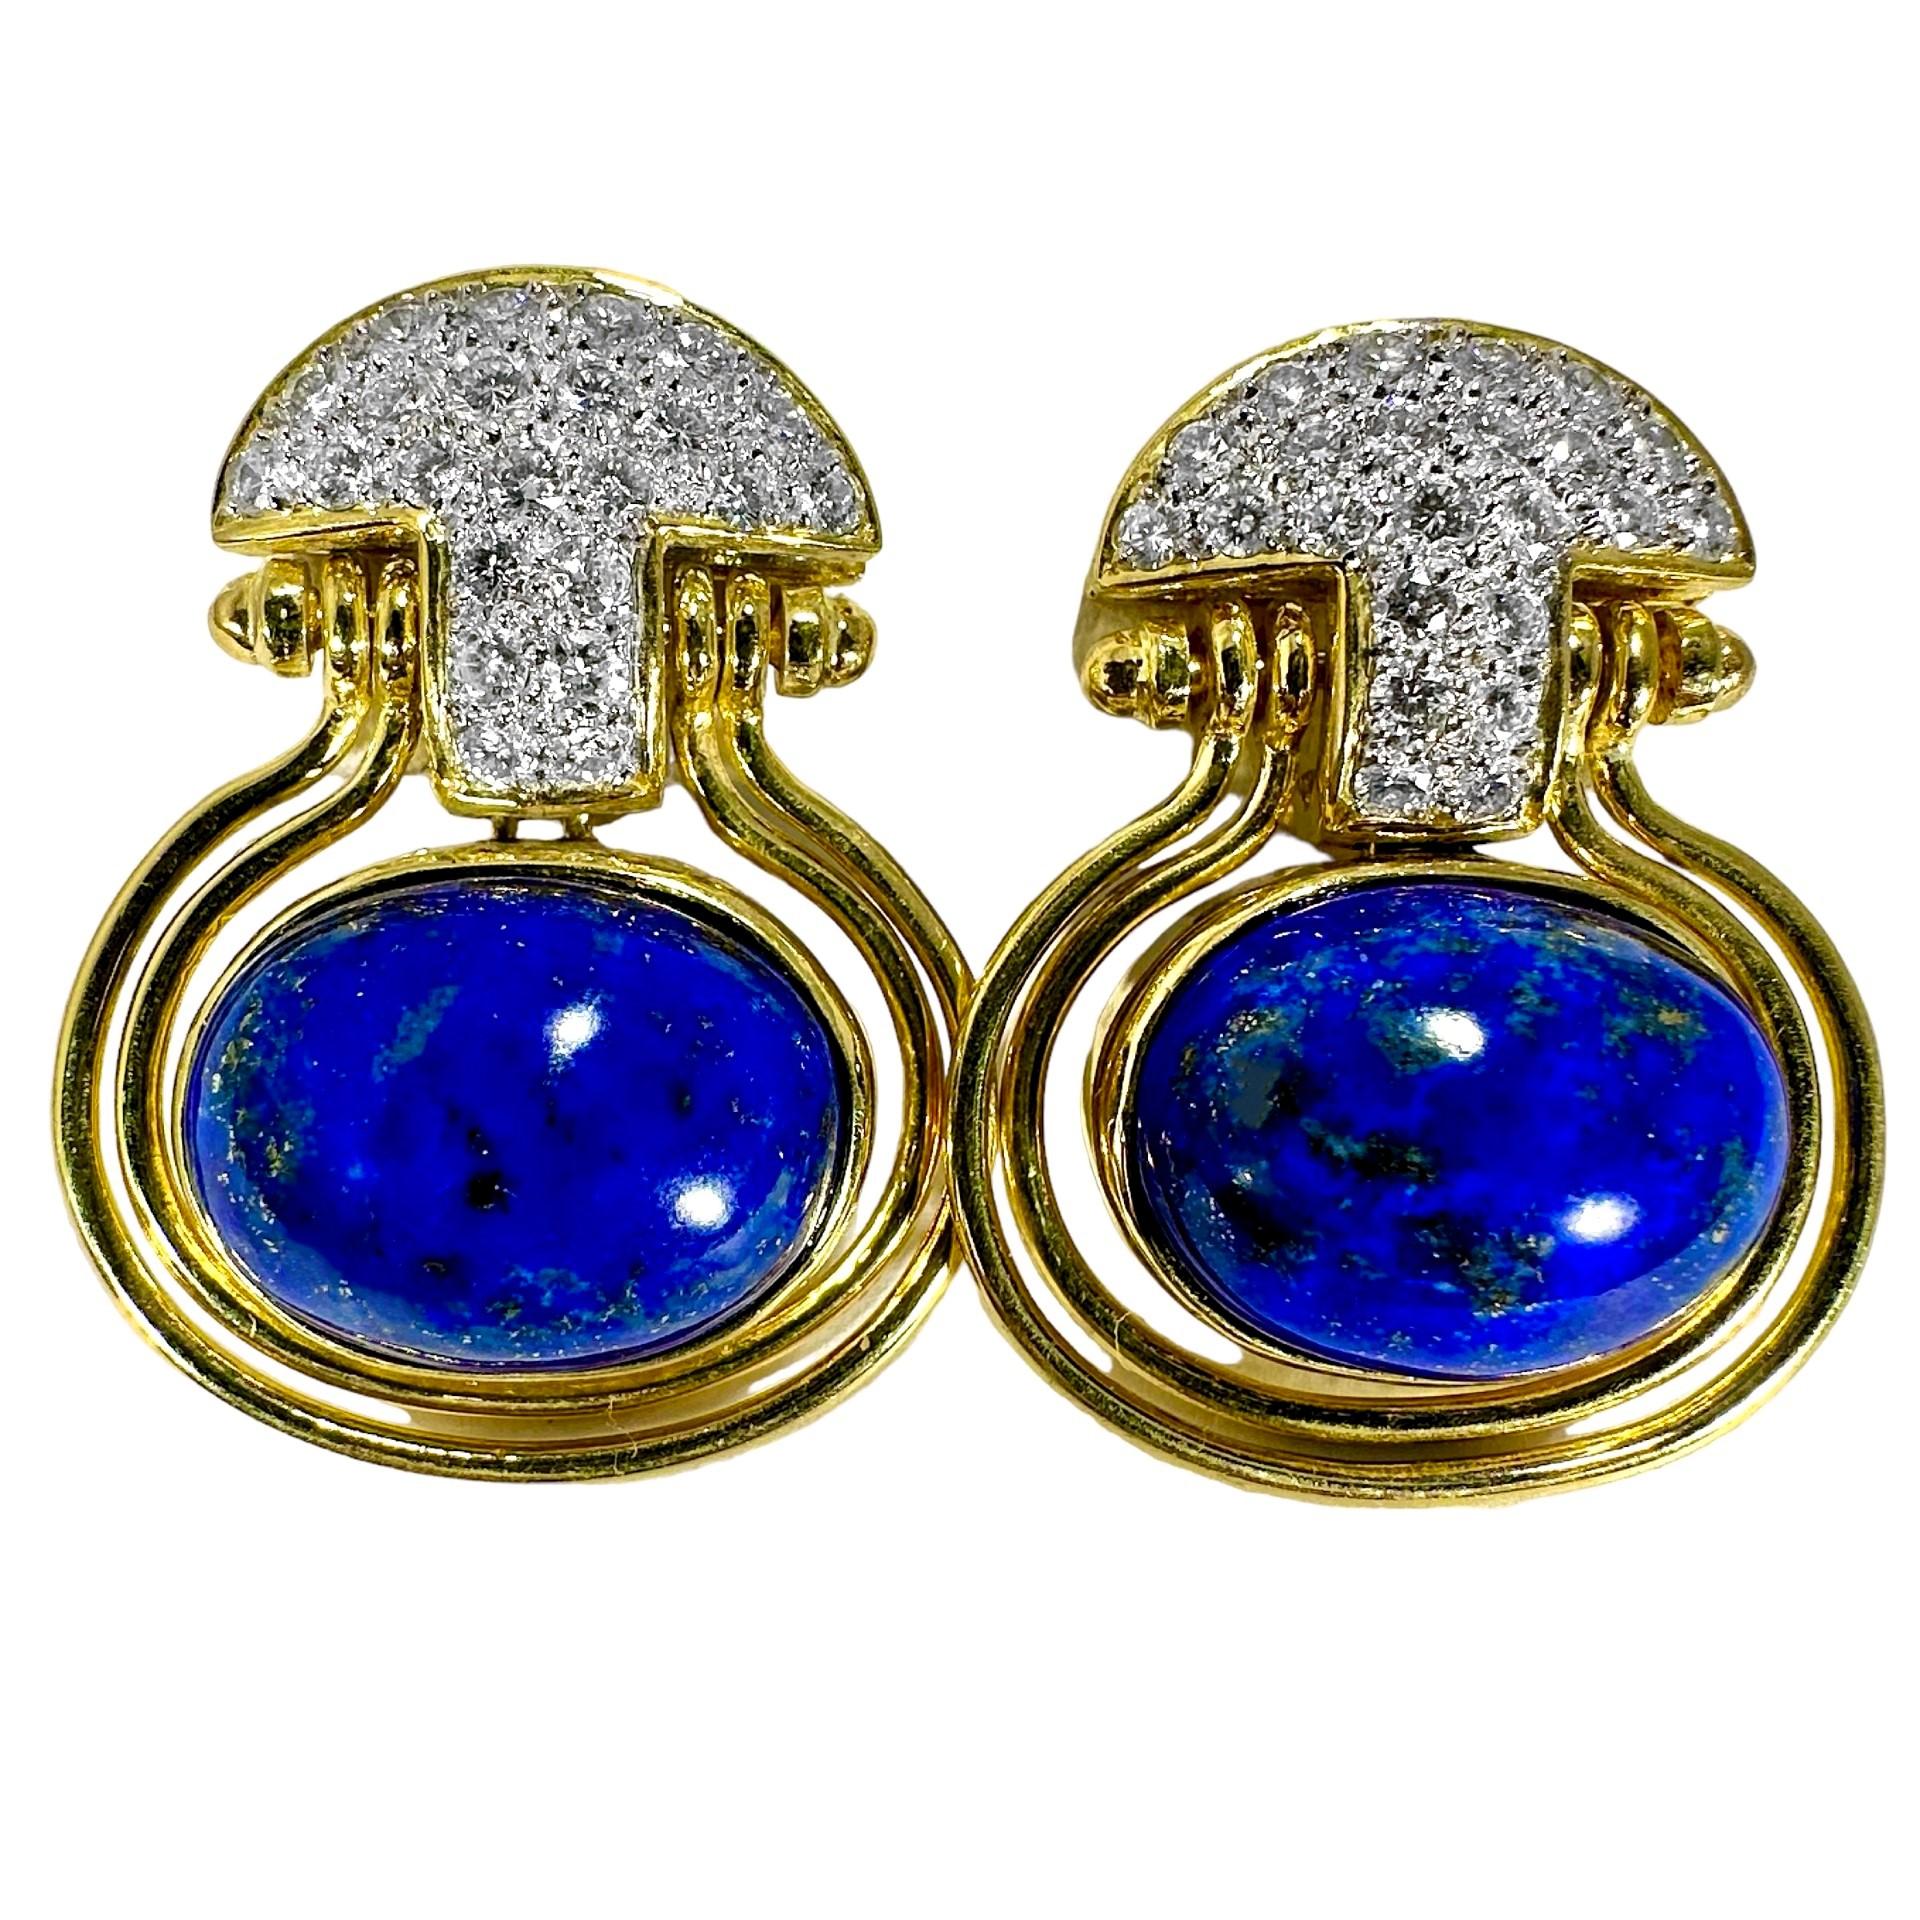 This very well crafted pair of 18k yellow gold late-20th Century earrings are bezel set with two beautifully variegated  Lapis Lazuli cabochons. This bezel set component is suspended from a bombe dome which is heavily encrusted with fine quality